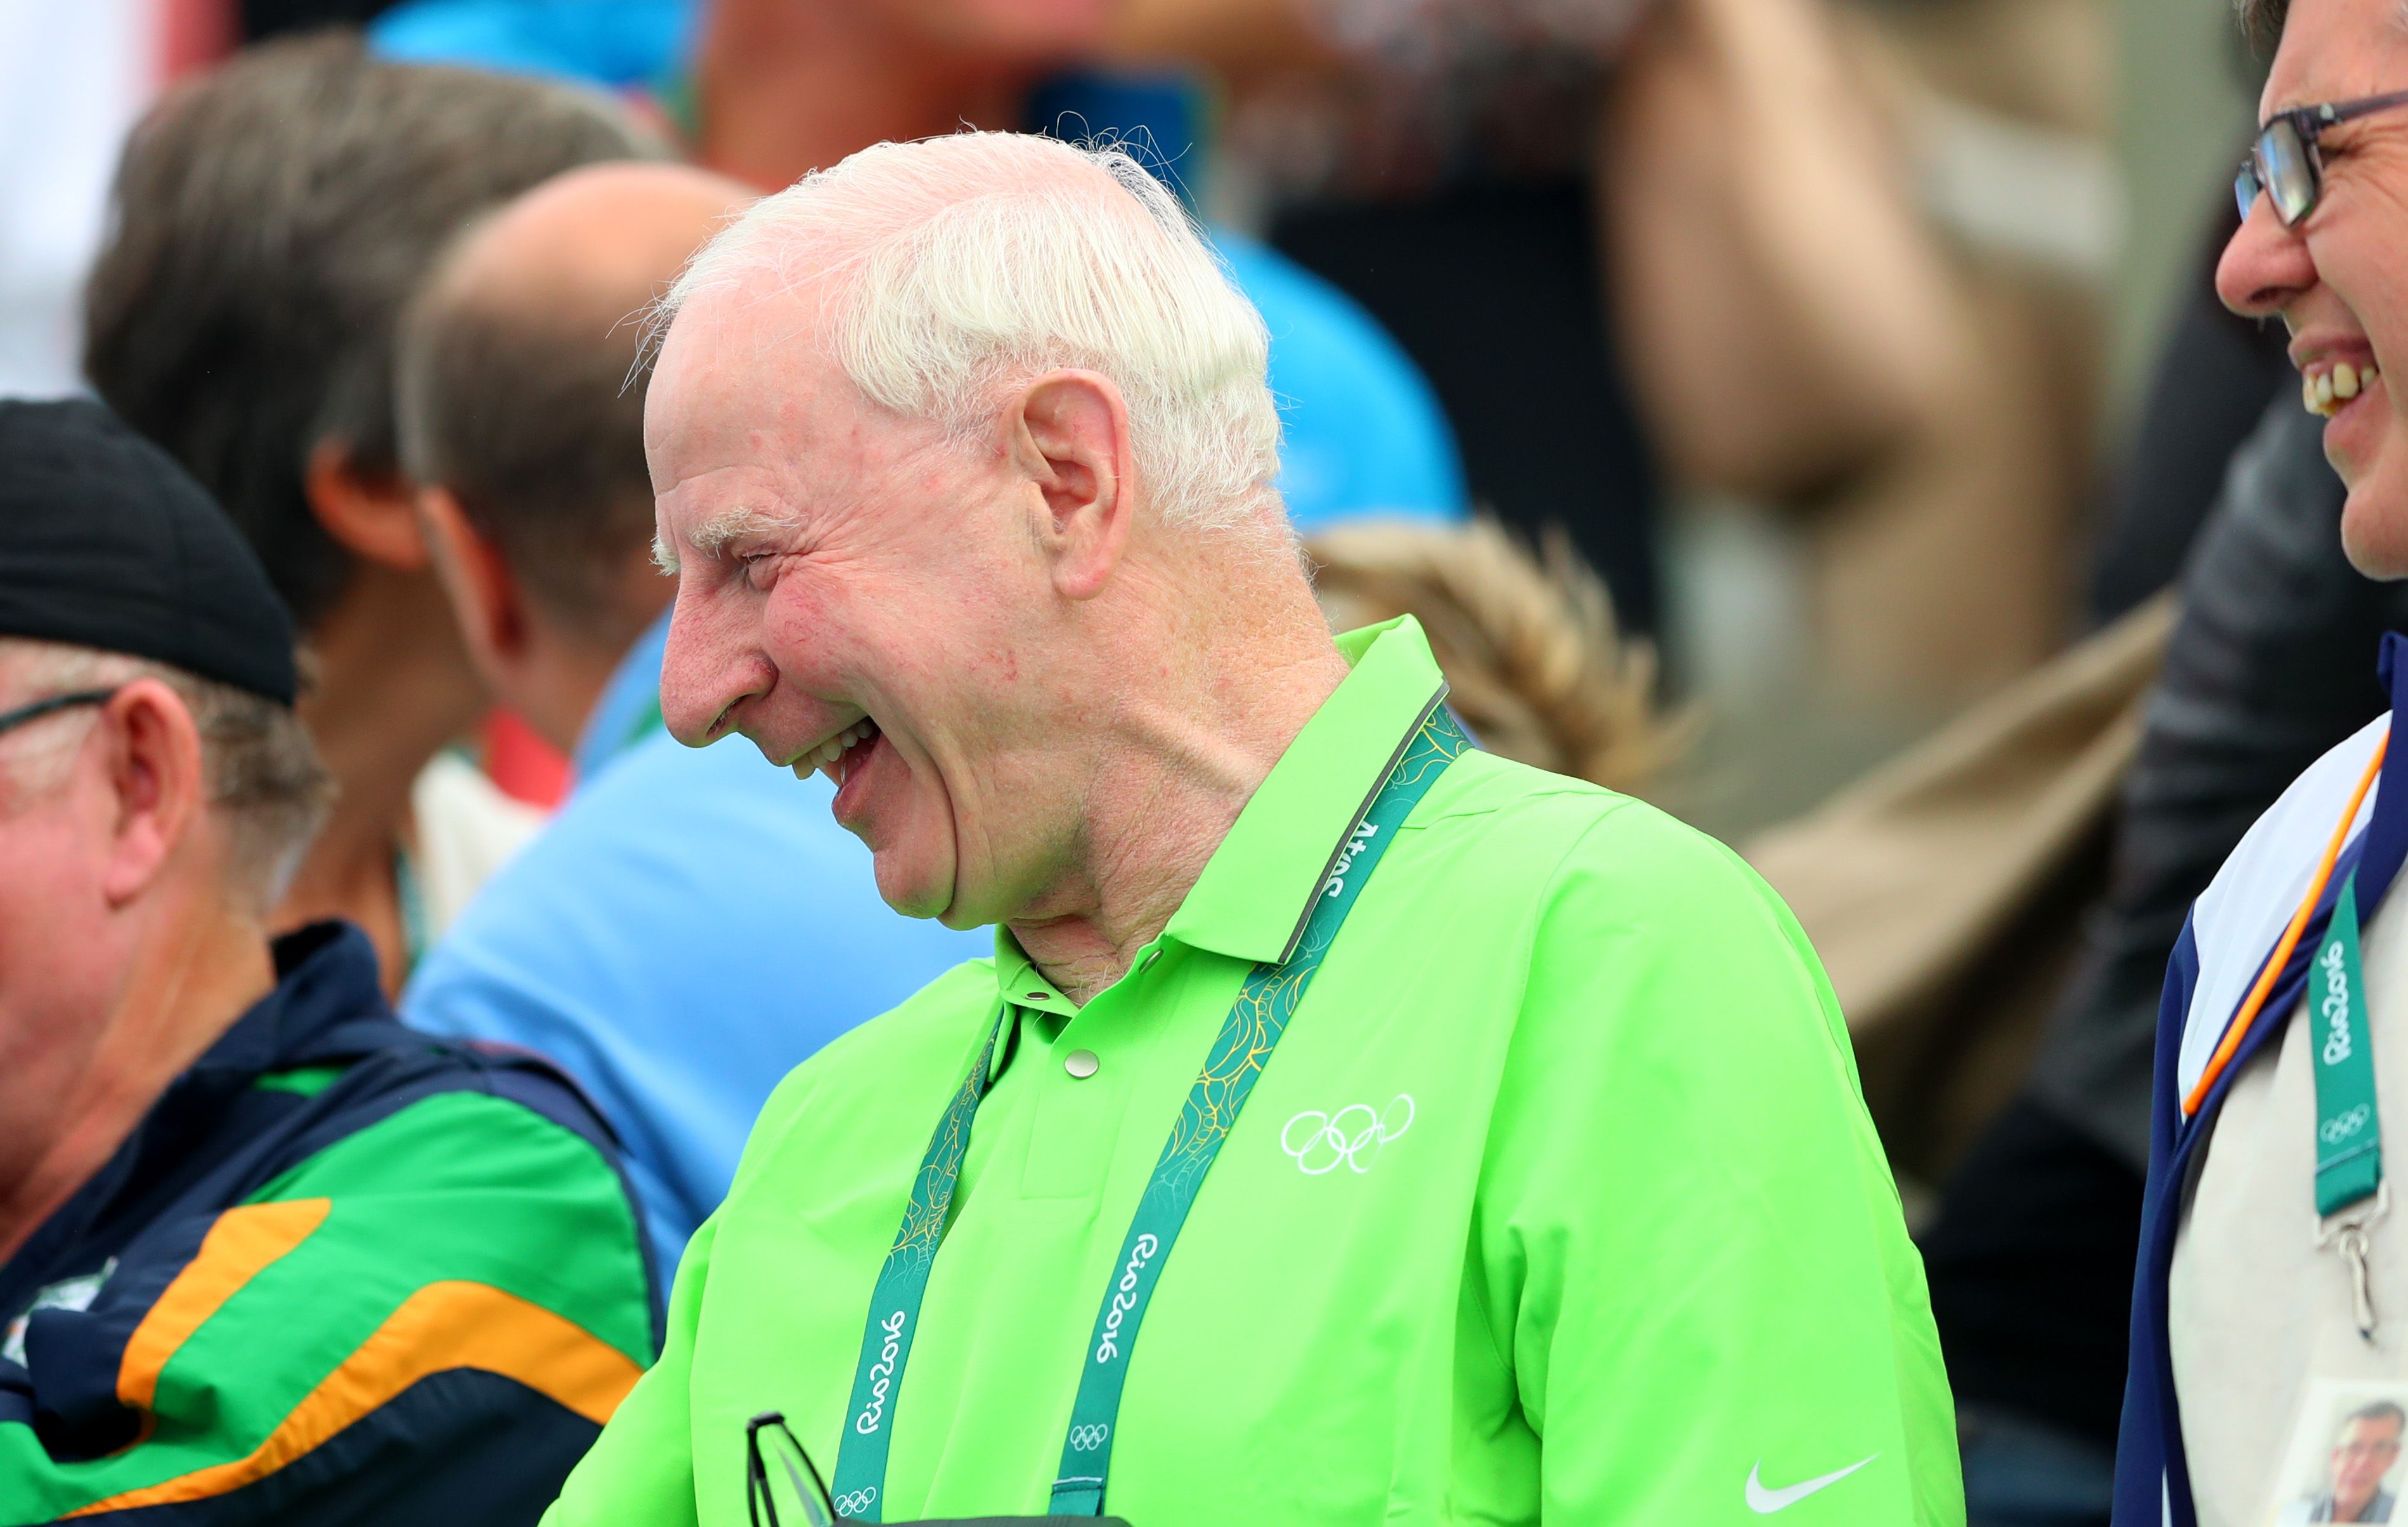 Rio 2016 Olympic Games Day 7, Rio de Janeiro, Brazil 12/8/2016 Rowing - Men's Lightweight Double Sculls Final OCI President Pat Hickey celebrates Mandatory Credit ©INPHO/James Crombie